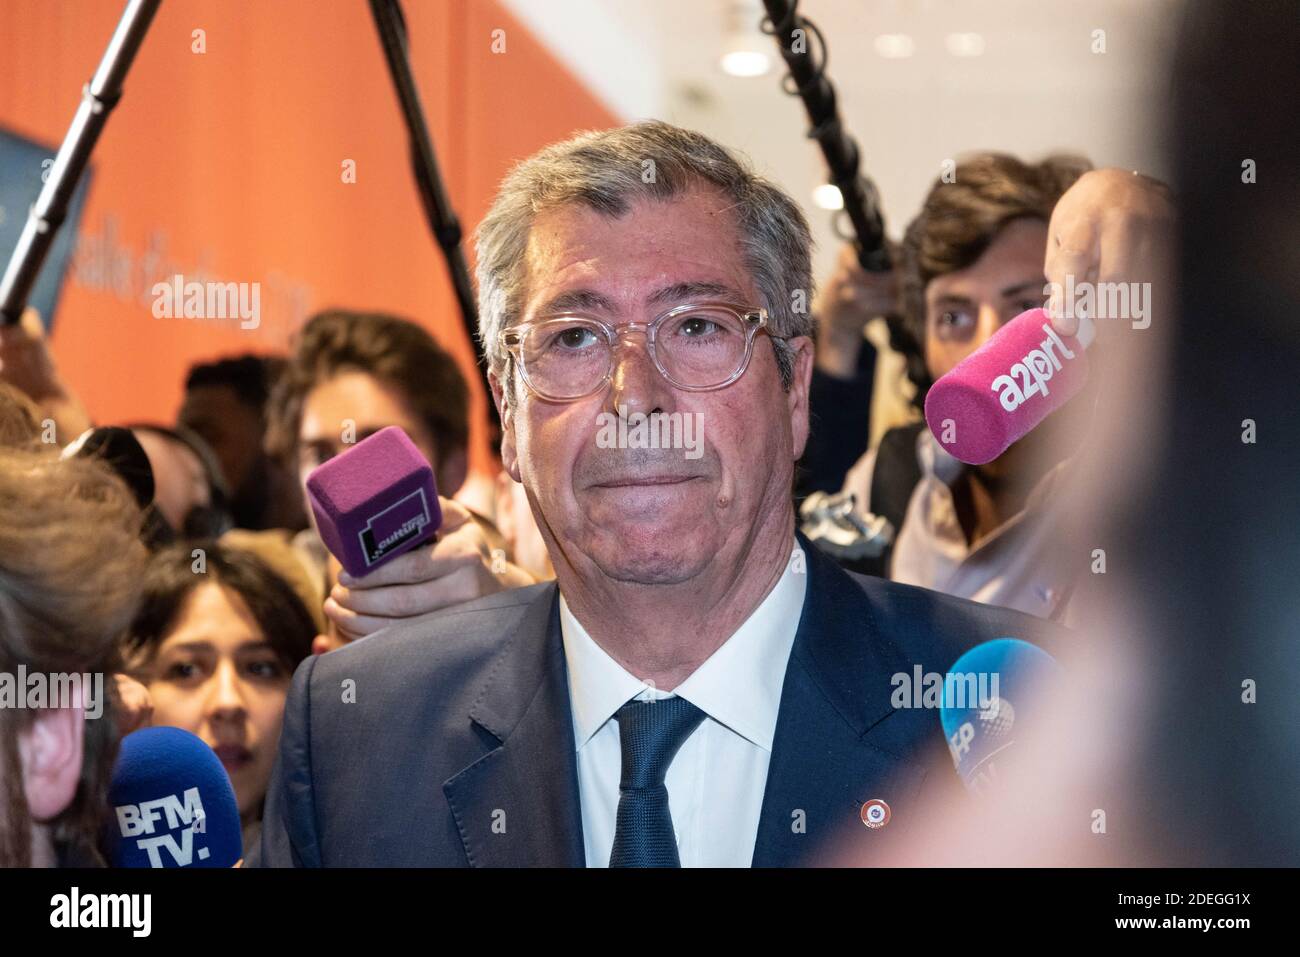 Patrick Balkany leaves the courtroom during his trial at the Paris court  for Tax Fraud and Money Laundering and misappropriation of public funds.  Paris, France, May 13, 2019. Photo by Samuel Boivin/ABACAPRESS.COM